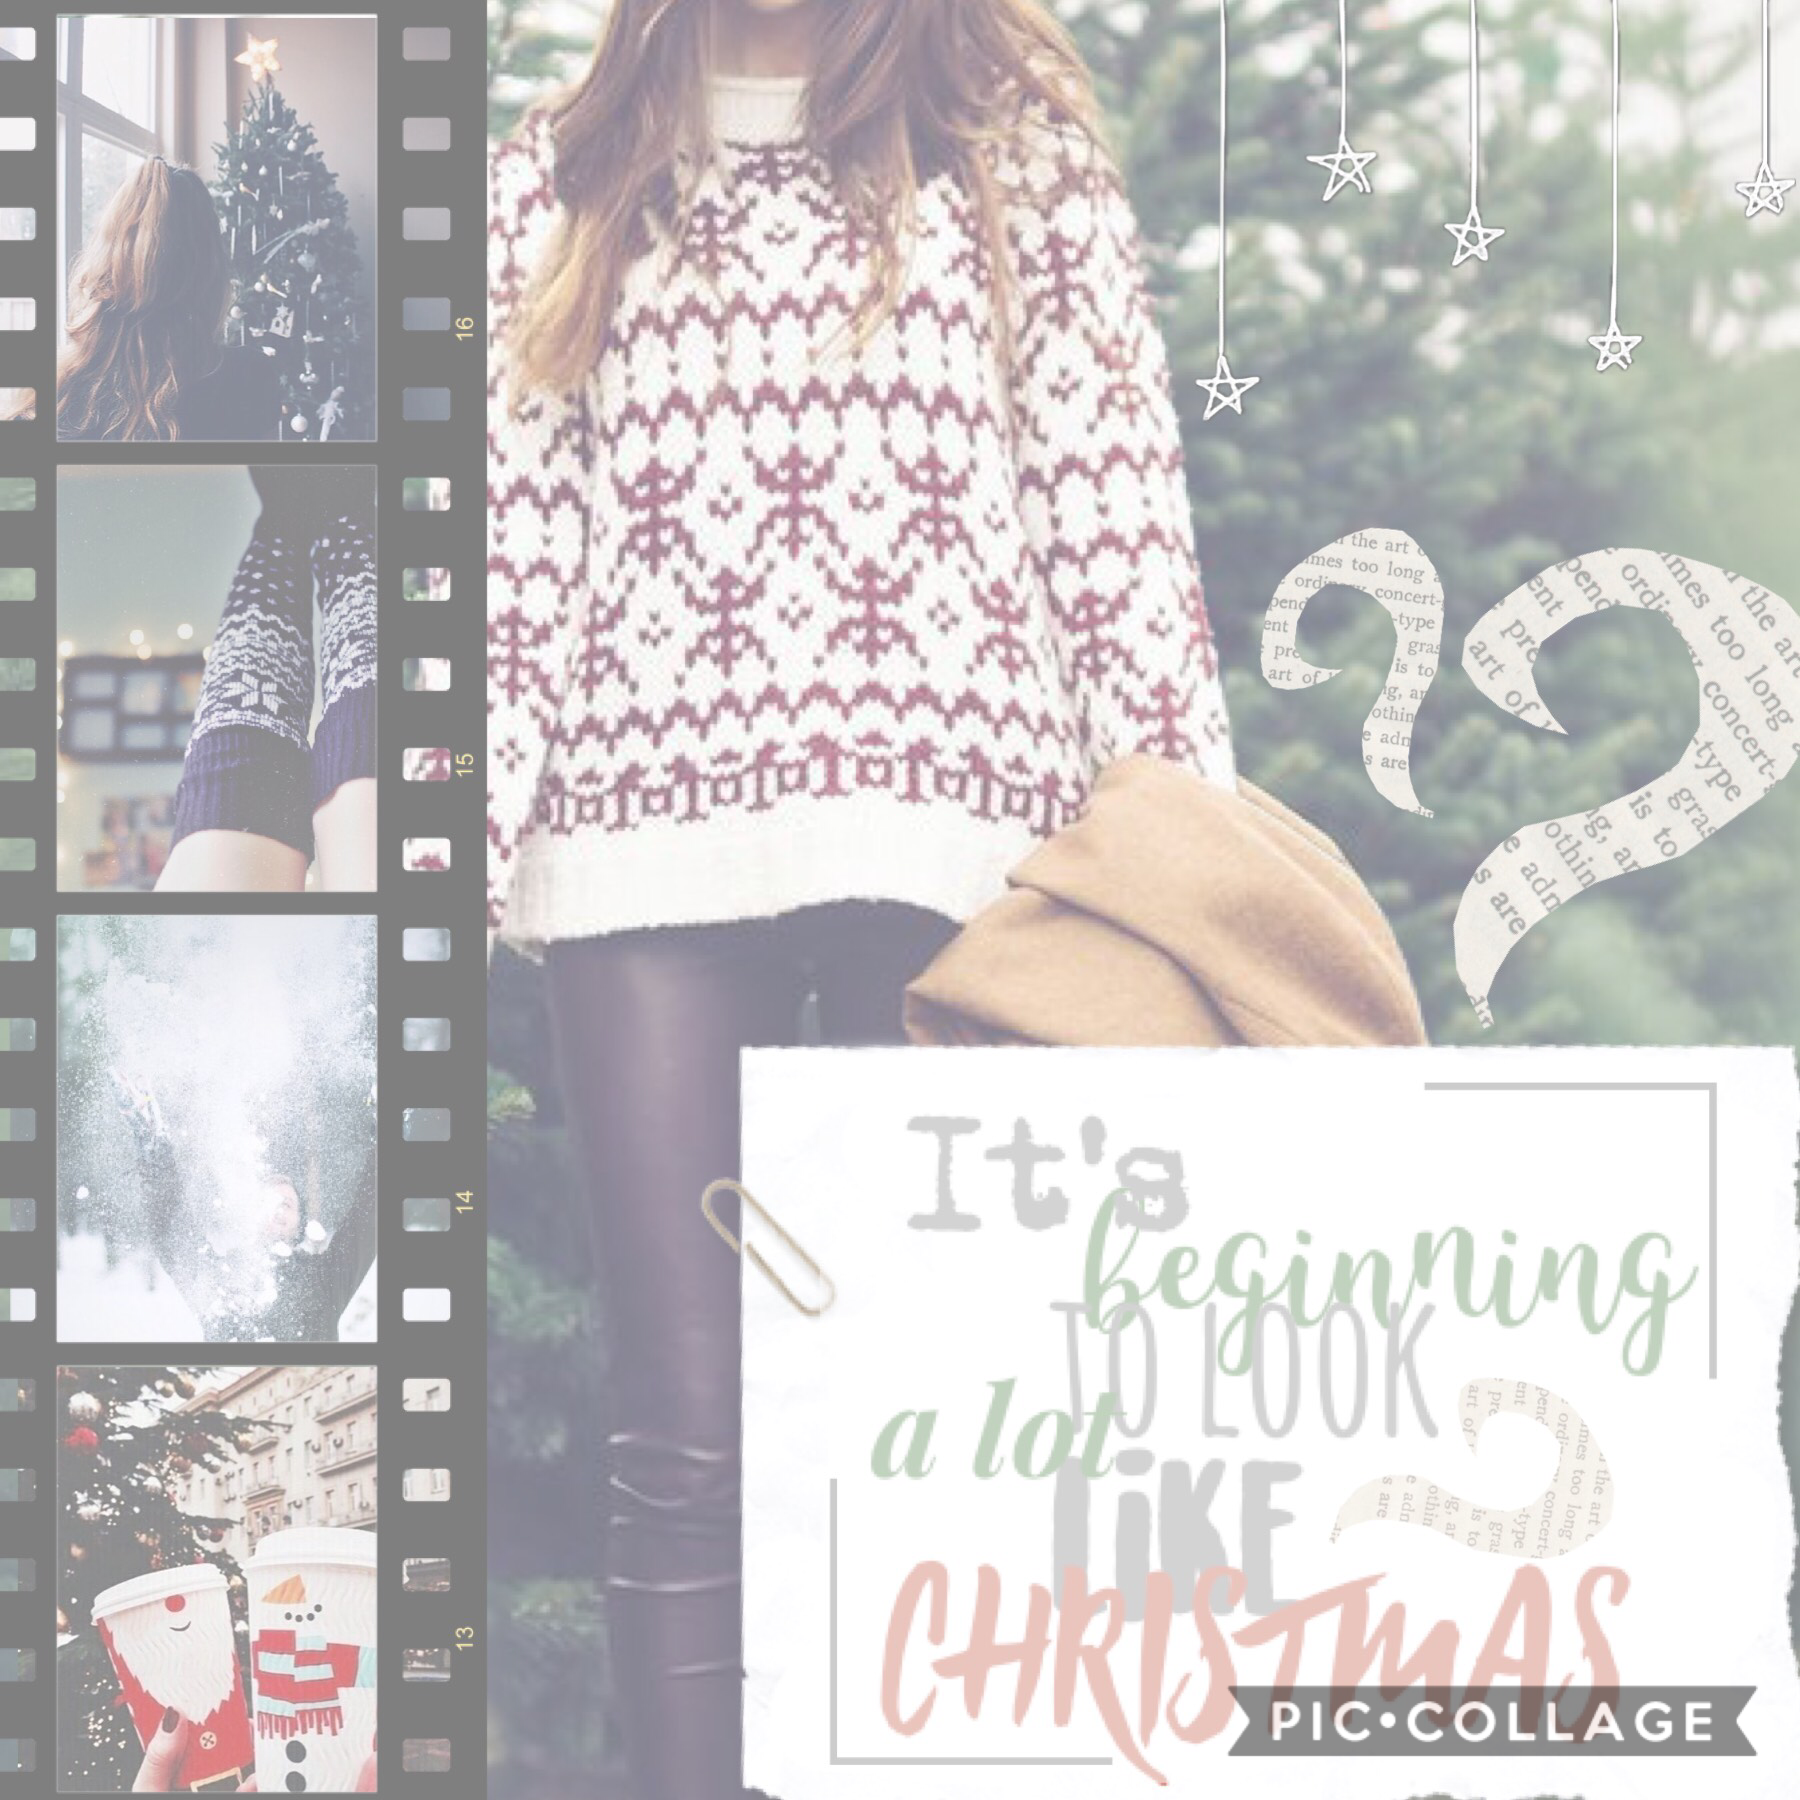 tap!!🎄🎄
Yay more Christmas edits😂I really like this one, tell me what you think below in comments\/ ummmm... 1-10? QOTD: Have you started putting up Christmas decorations? AOTD: YEP😆😆